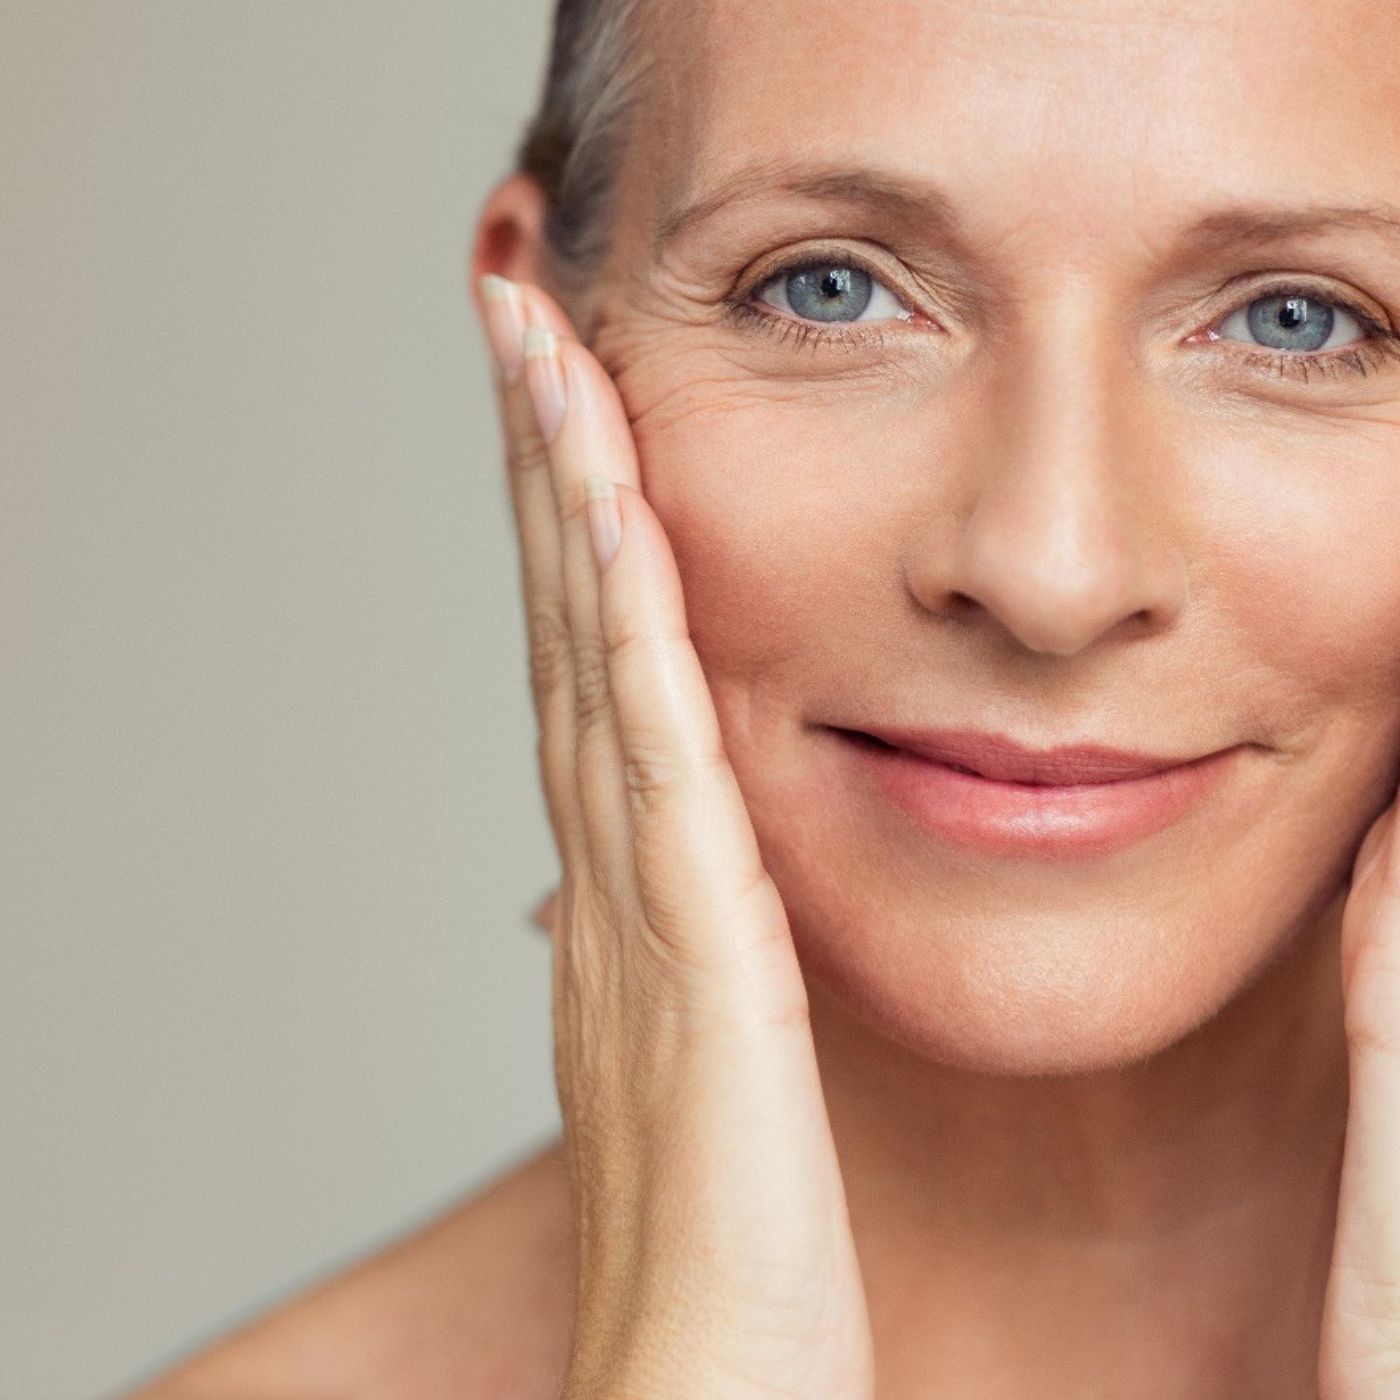 9 Skincare Essentials For Your Anti-Aging Routine